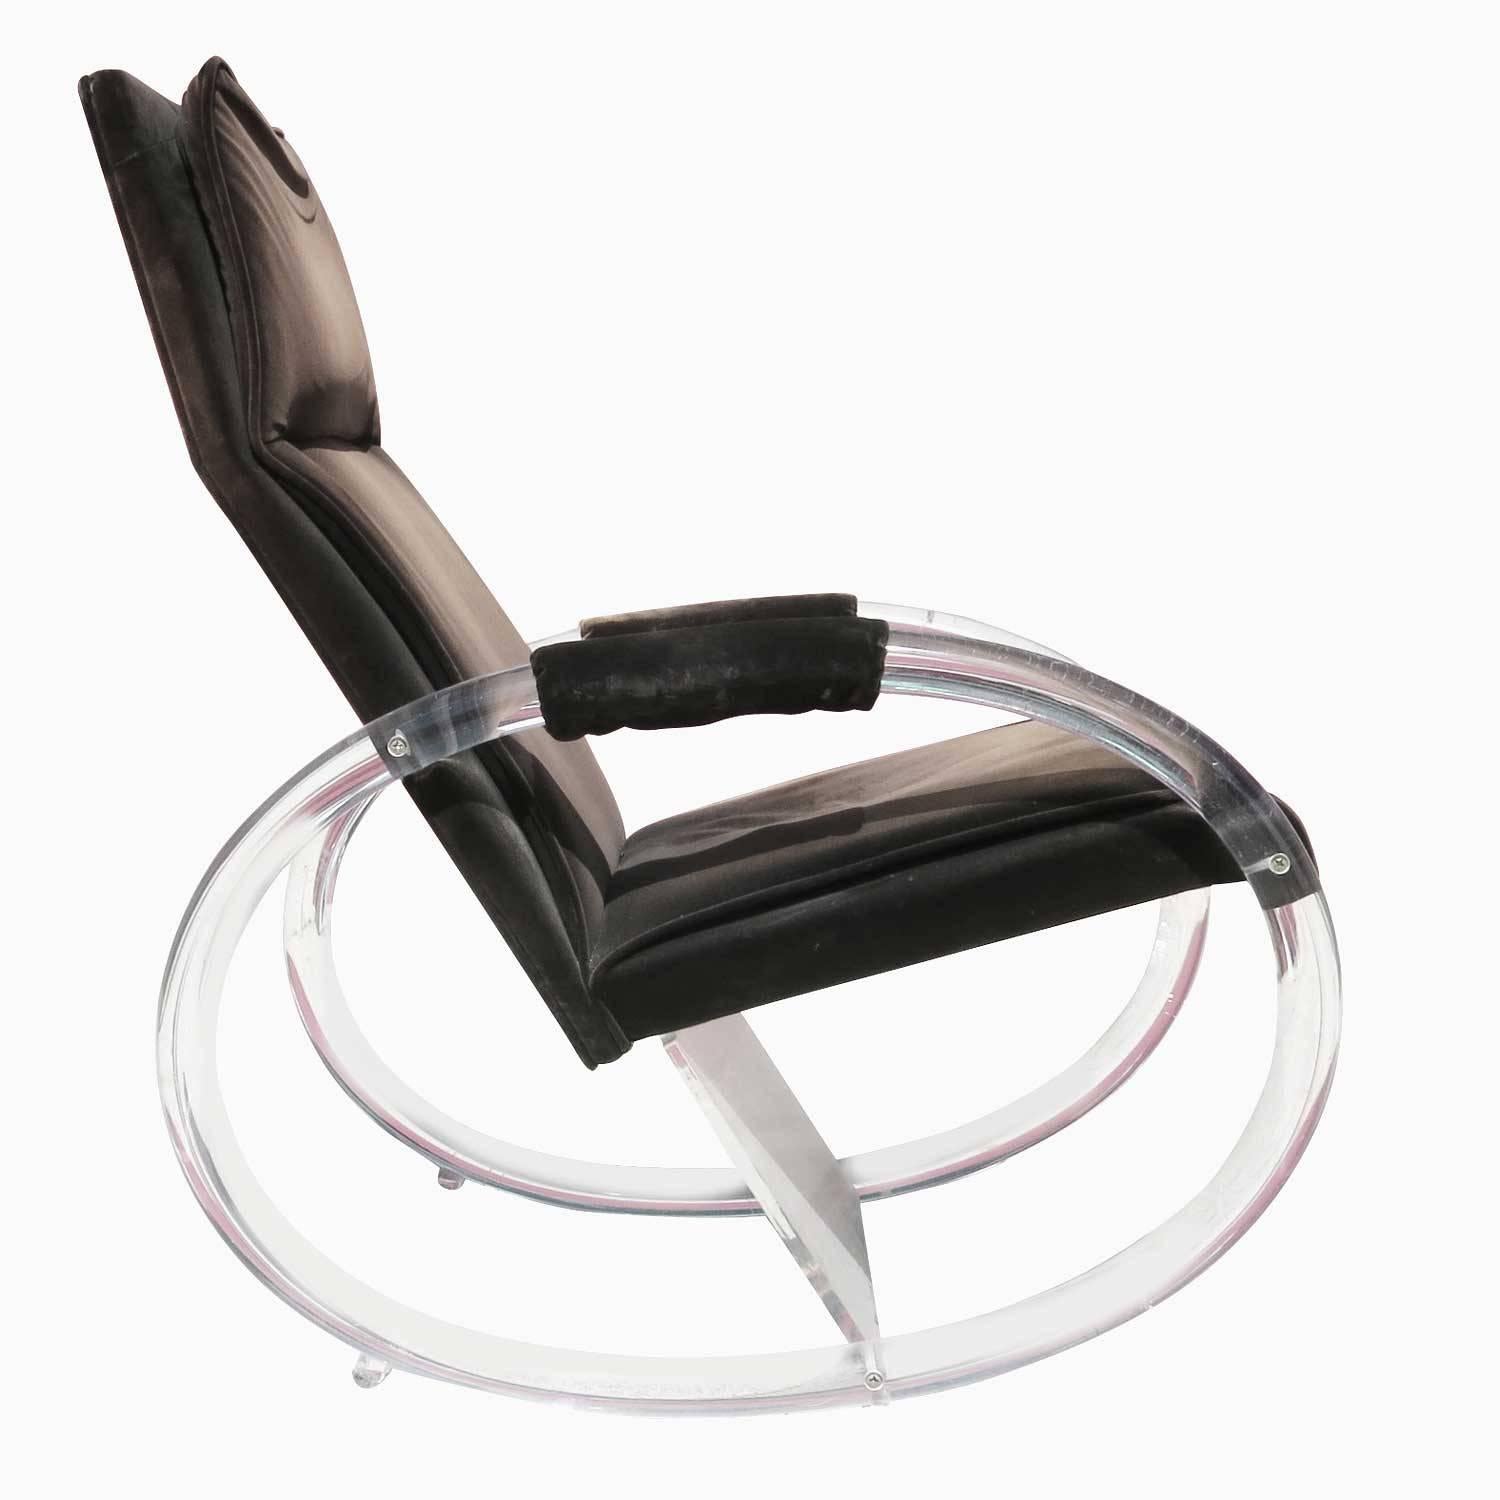 Lucite rocking chair by designer Charles Hollis Jones, upholstered in a chocolate velvet fabric with sculptural oval arms and Lucite base. The chair features an almost floating quality in the right light. 

Signed Charles Hollis